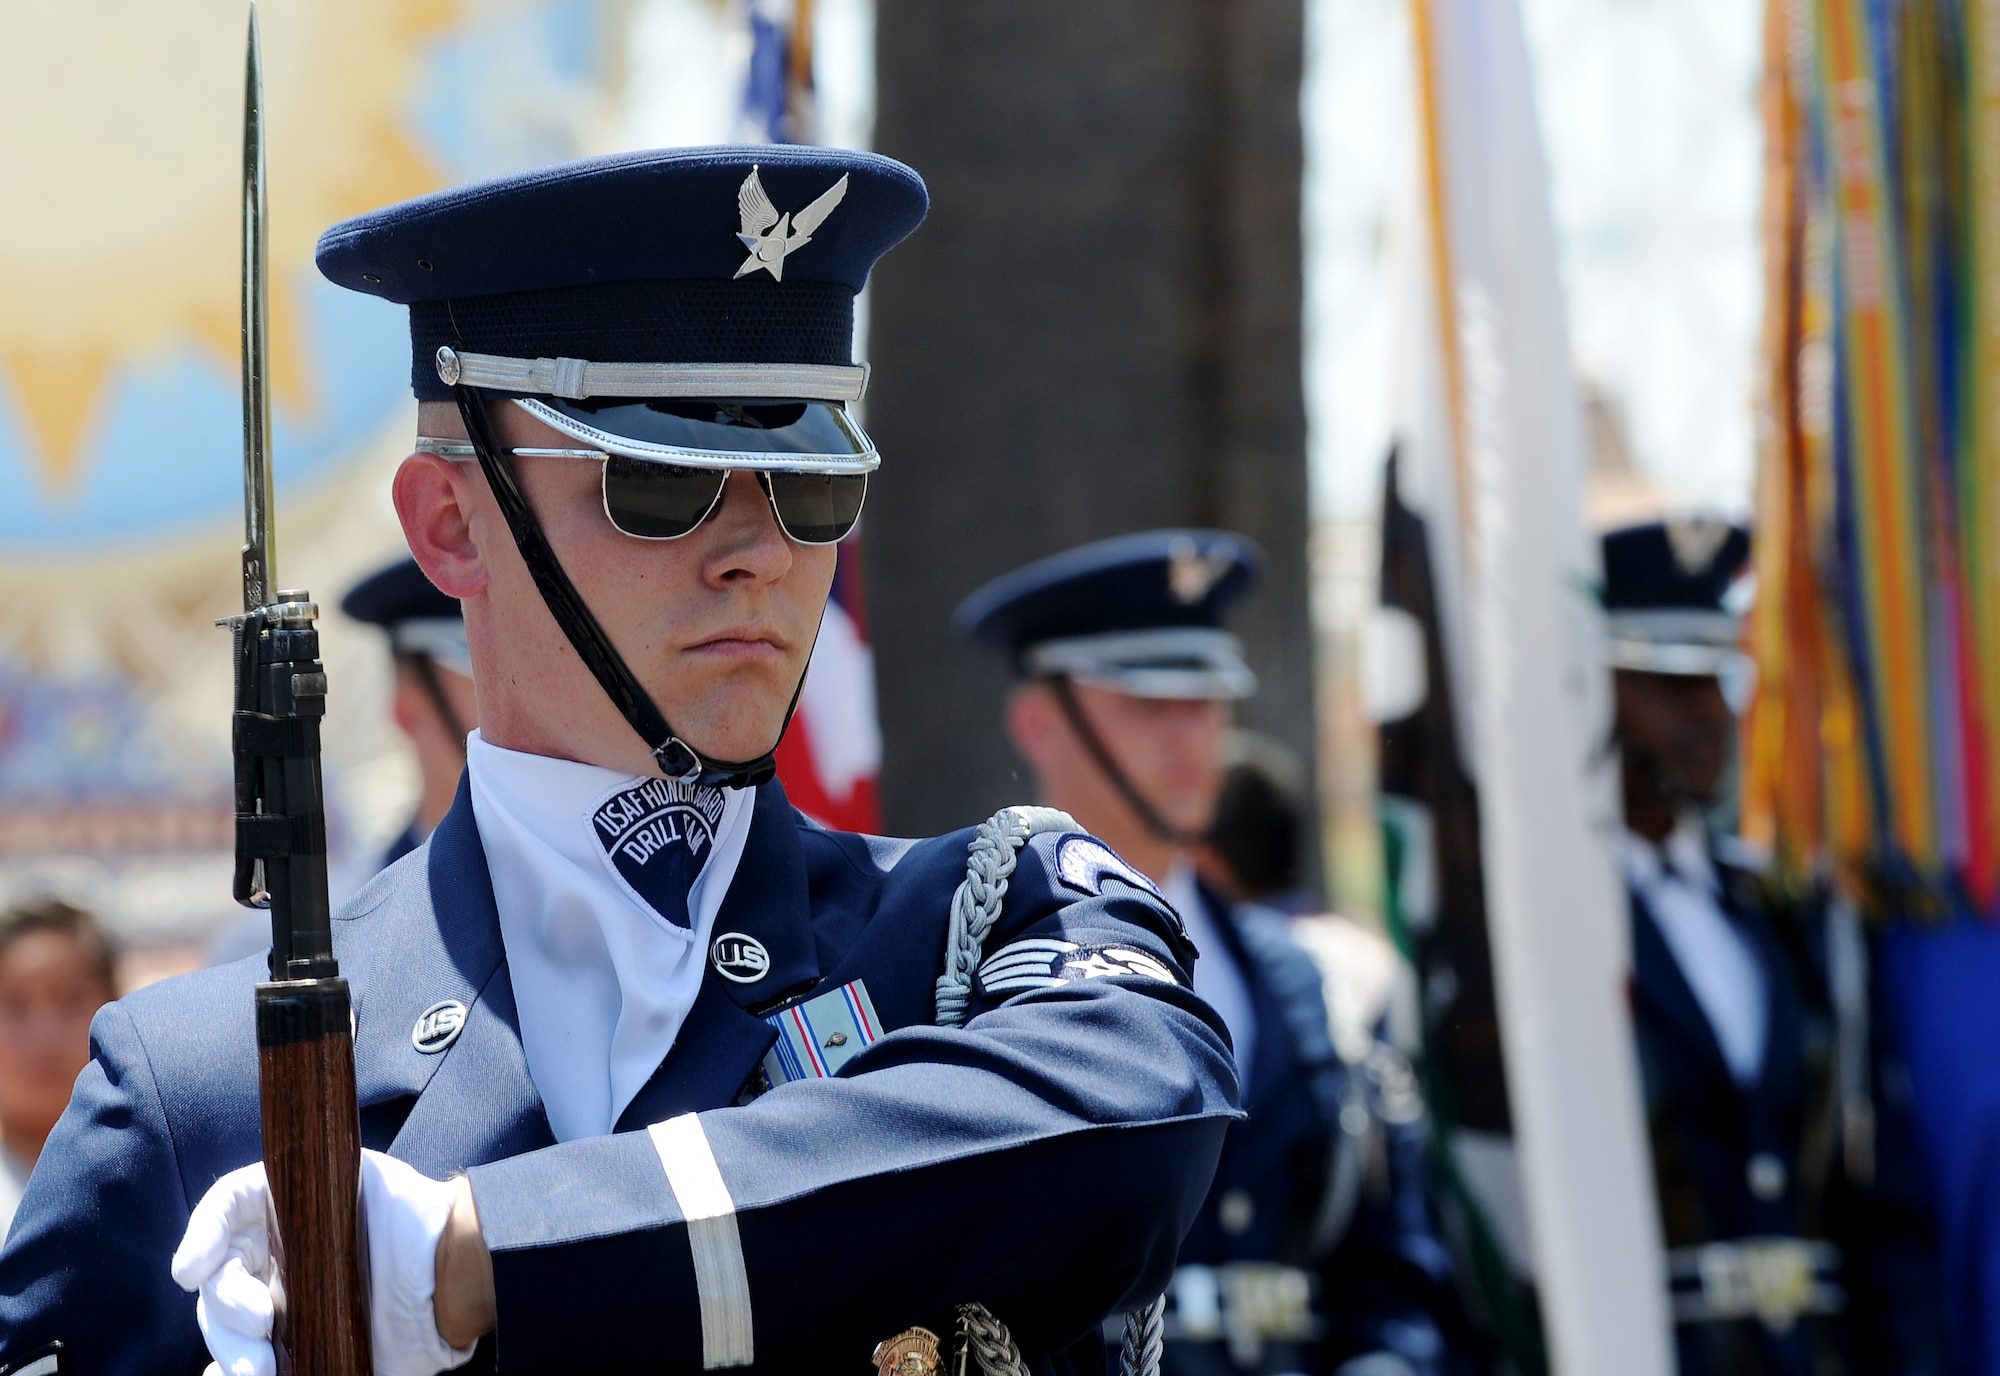 Staff Sgt. Daniel Sellstrom, United States Air Force Honor Guard drill team, participates in a drill performance at Disney’s California Adventure in Anaheim, Calif., July 2, 2015. (U.S. Air Force photo/Staff Sgt. Nichelle Anderson)